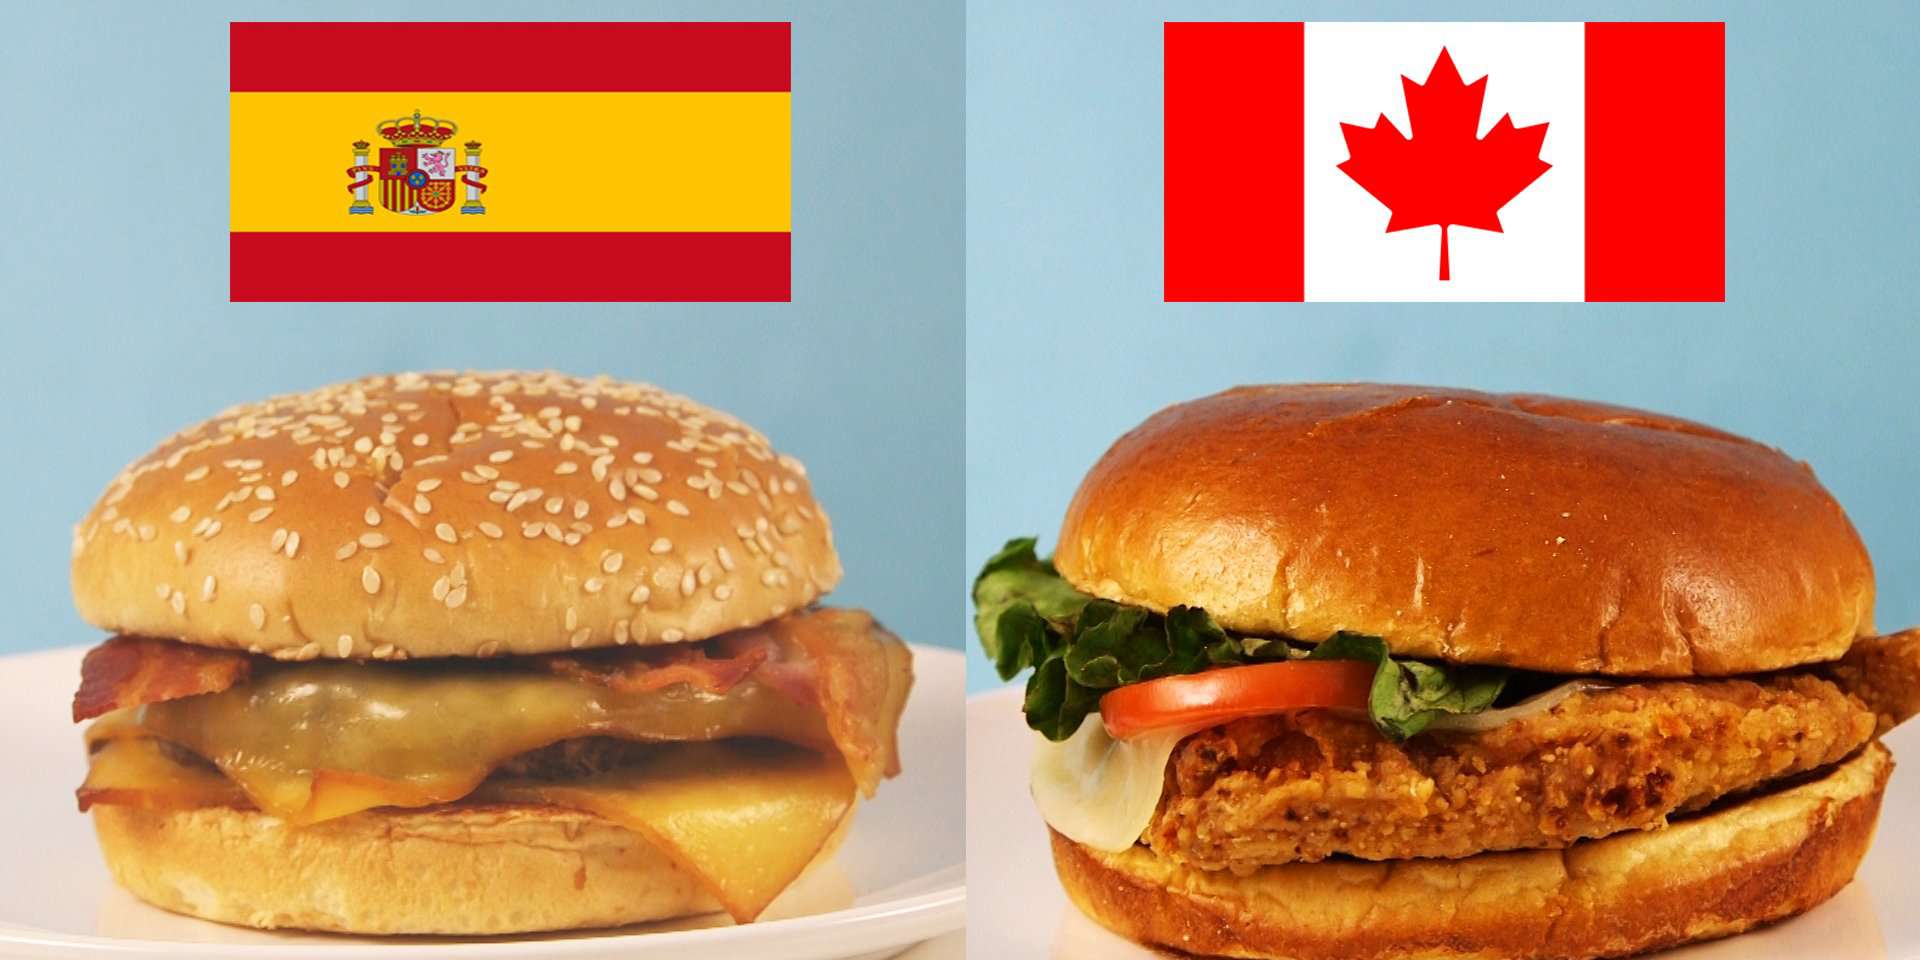 Taboola Ad Example 52159 - McDonald's Just Introduced The US To Its Most Popular International Menu Items. Here Are The Ones You Should Order And Avoid.